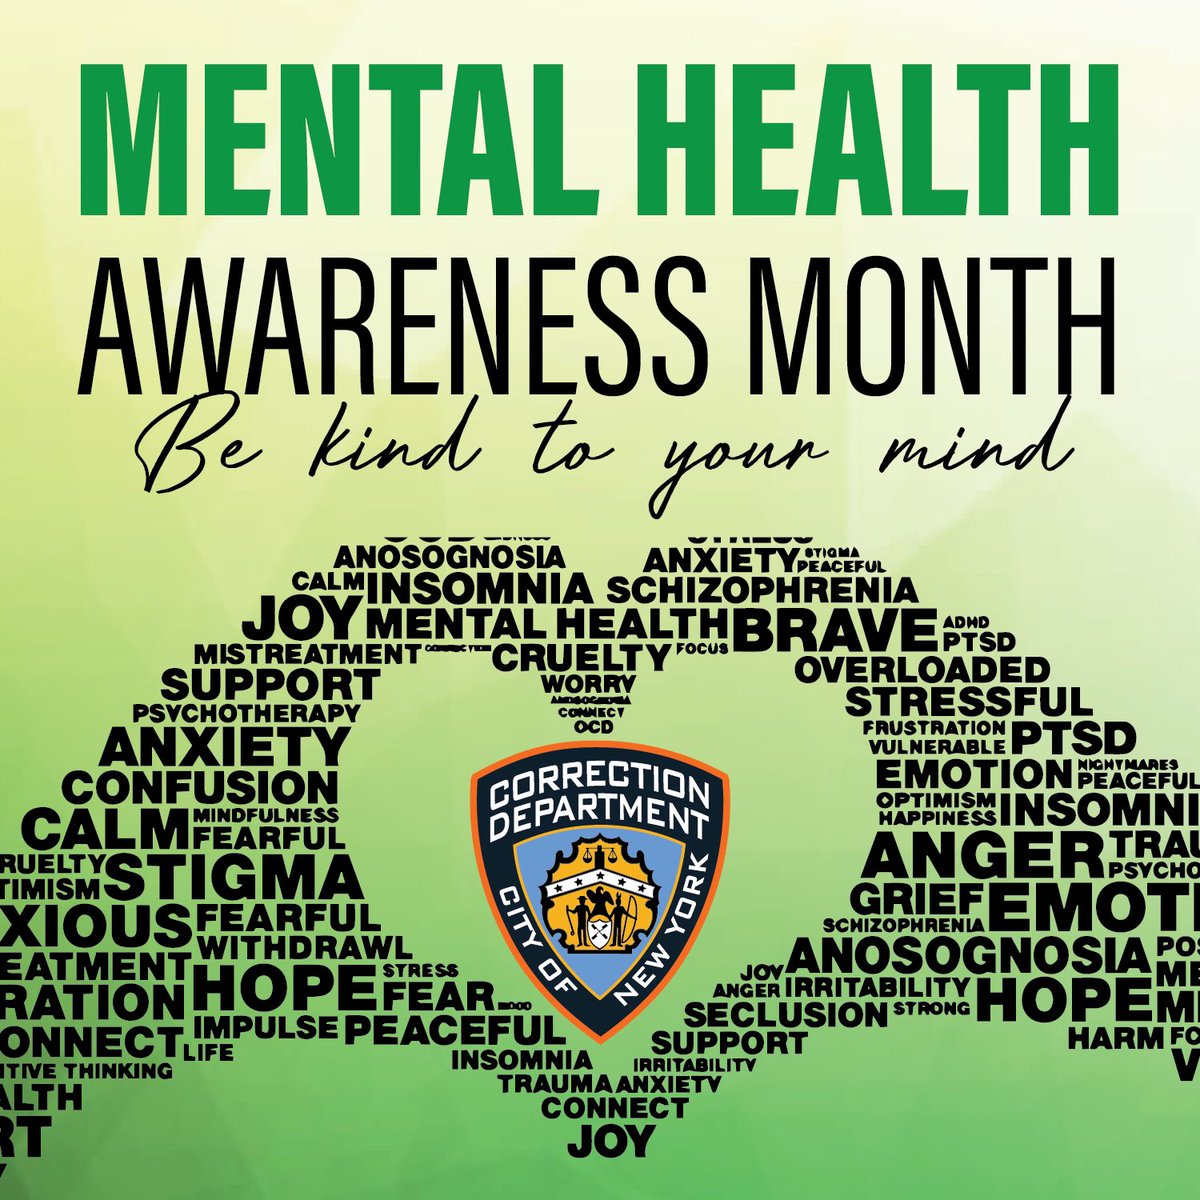 Today for #MentalHealthActionDay, and every day, #DOC remains committed to raising awareness about mental health and wellness. Learn more at bit.ly/3wuJaTo. @MentalHealthNYC #BeSeenInGreen